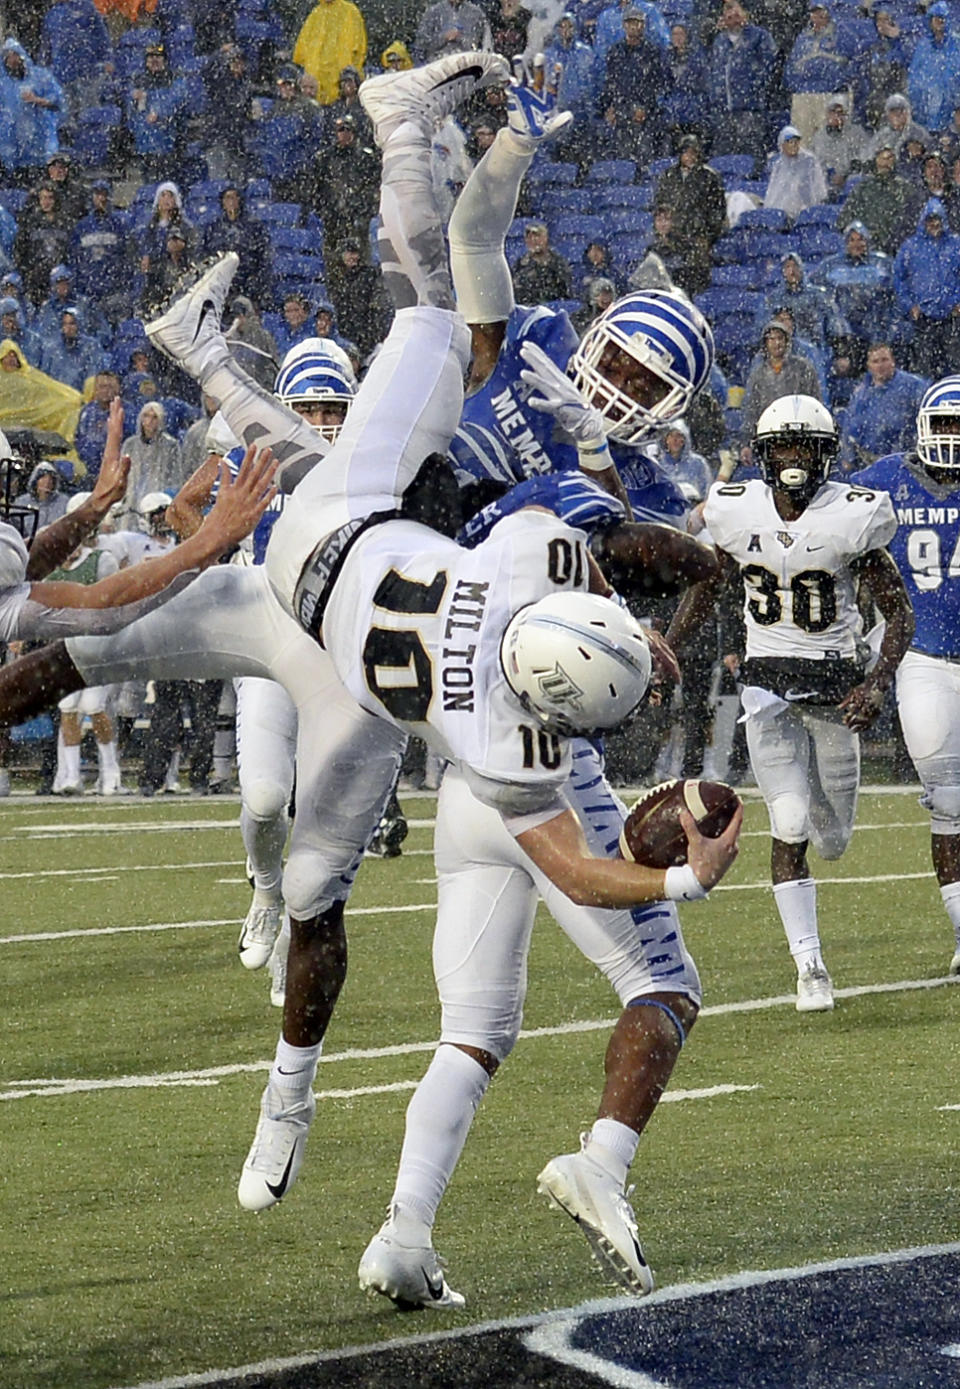 Central Florida quarterback McKenzie Milton (10) dives over Memphis defensive back Josh Perry (4) as he scores the go-ahead touchdown on a 7-yard run during the second half of an NCAA college football game Saturday, Oct. 13, 2018, in Memphis, Tenn. Central Florida won 31-30. (AP Photo/Mark Zaleski)